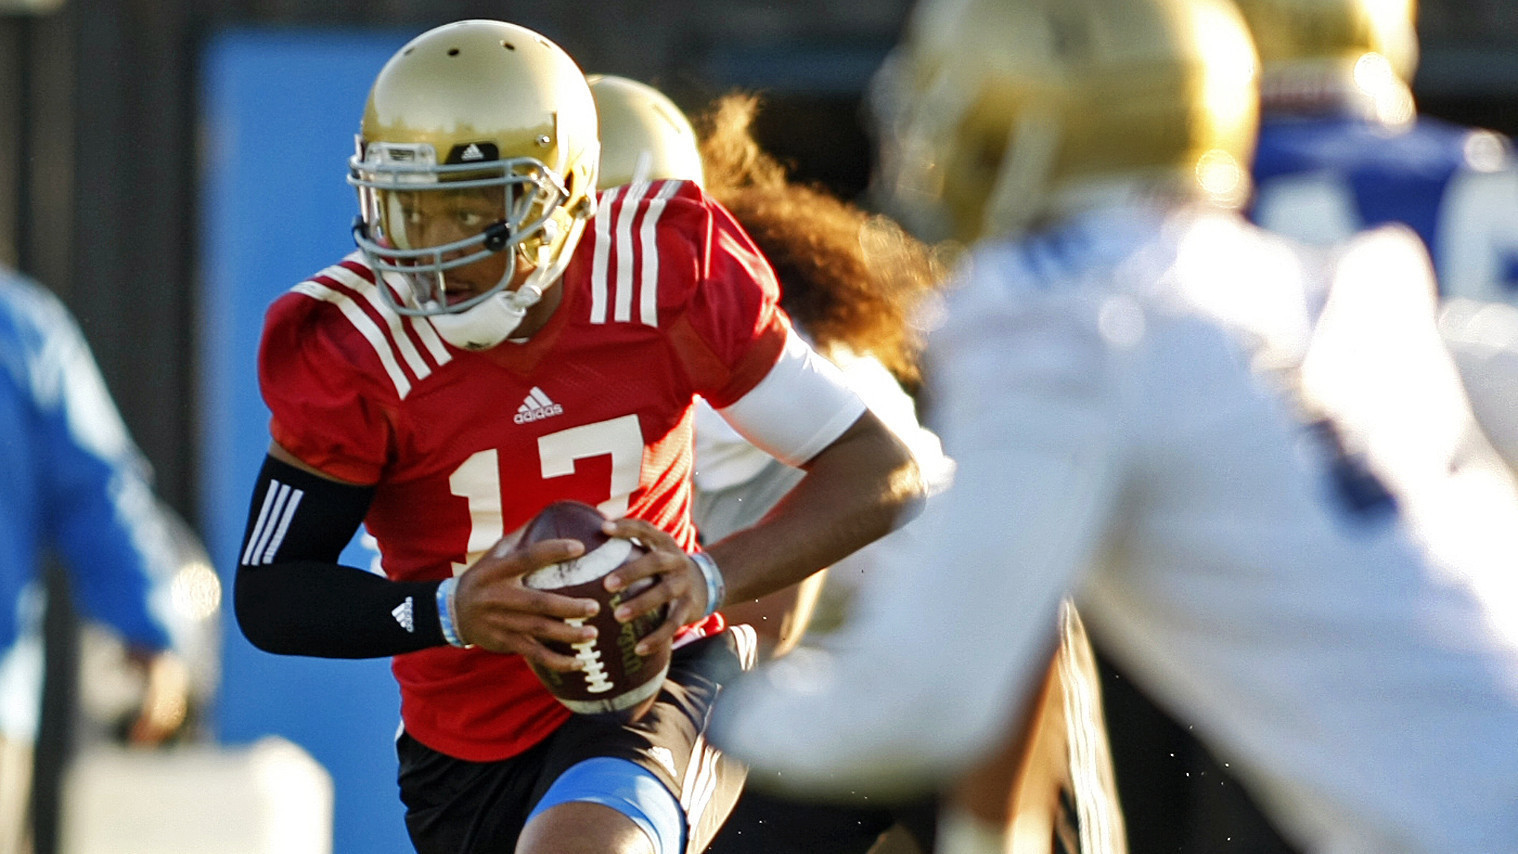 UCLA football has high expectations as camp begins Monday - LA Times